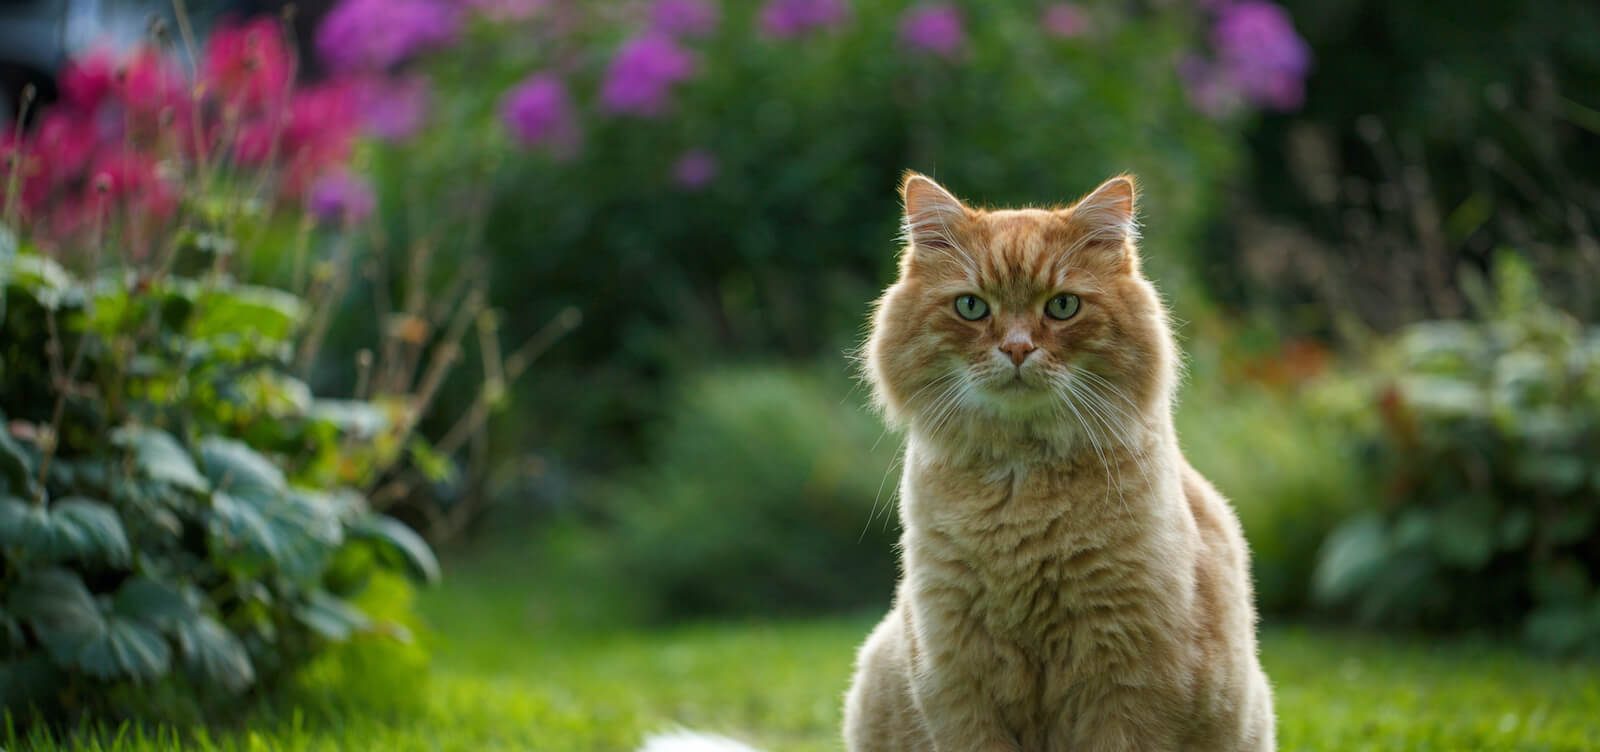 A photo of a ginger cat with an outside garden background